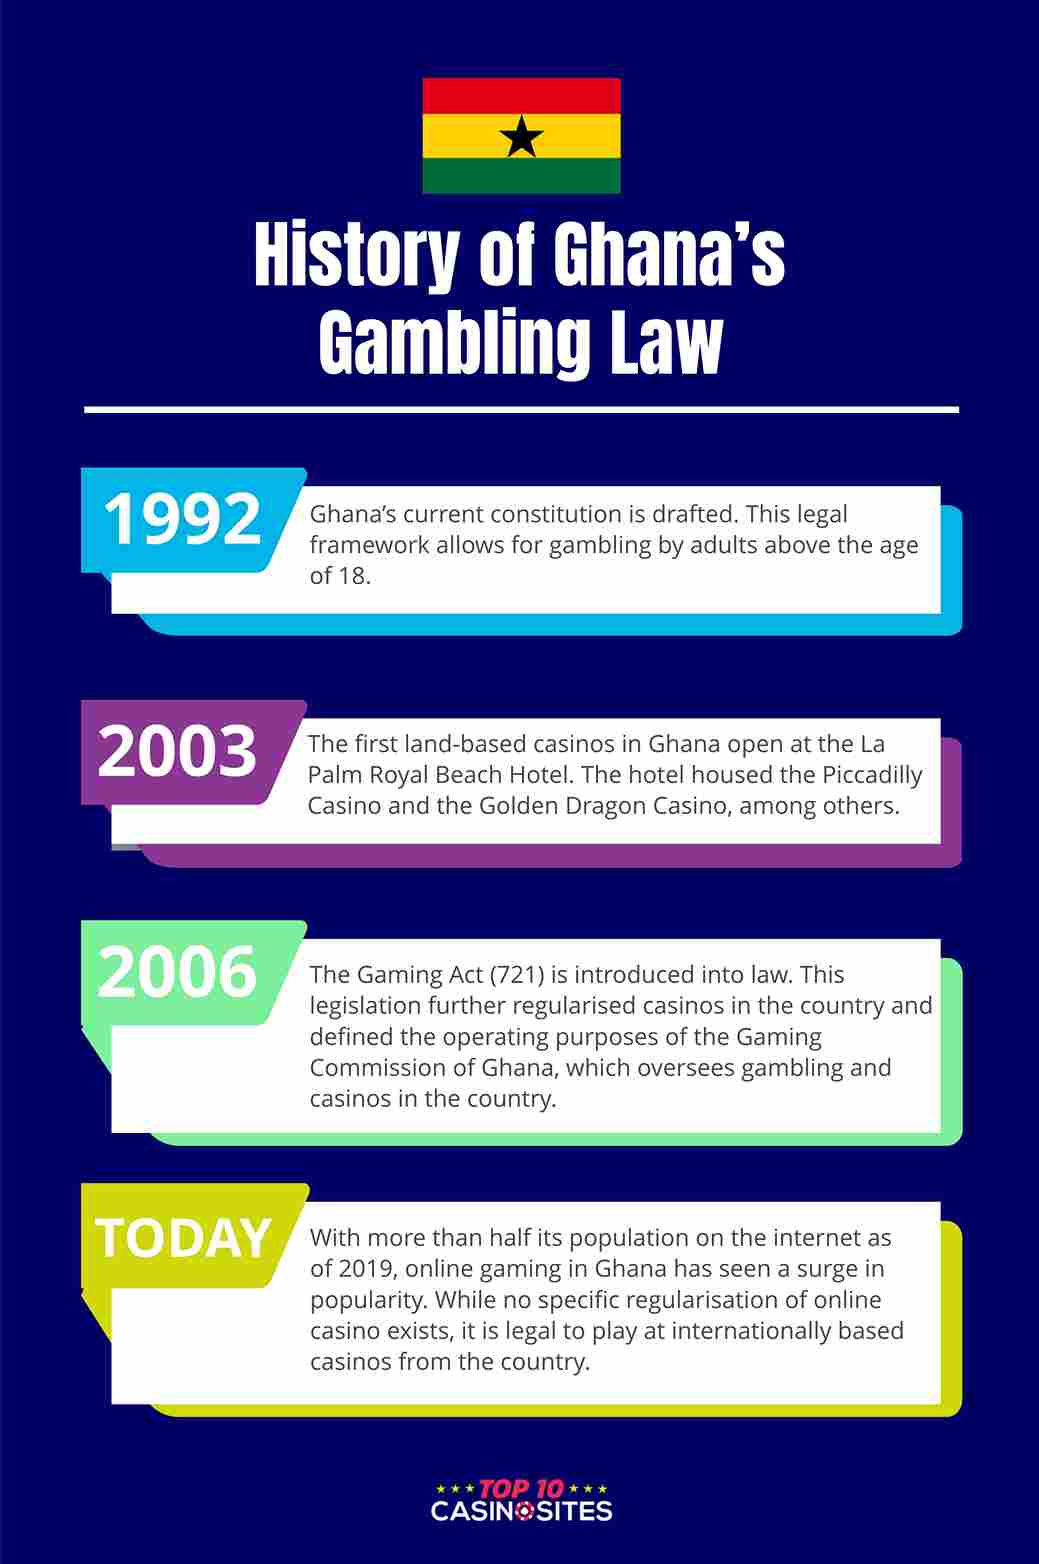 An infographic that outlines the history of gambling laws in Ghana